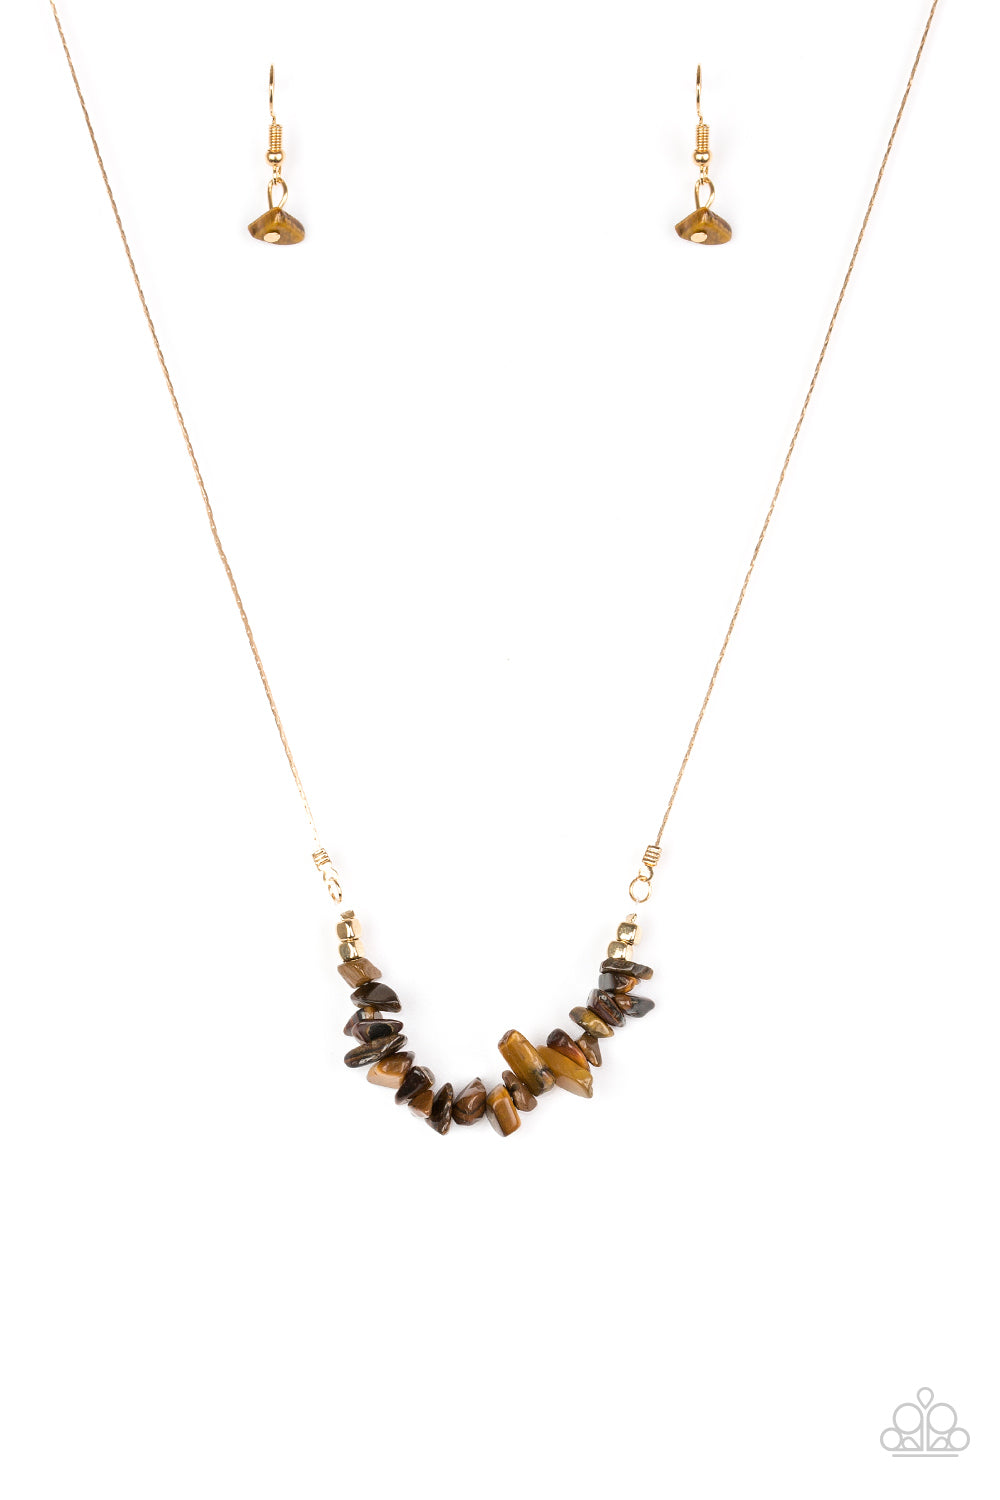 BACK TO NATURE - BROWN NECKLACE